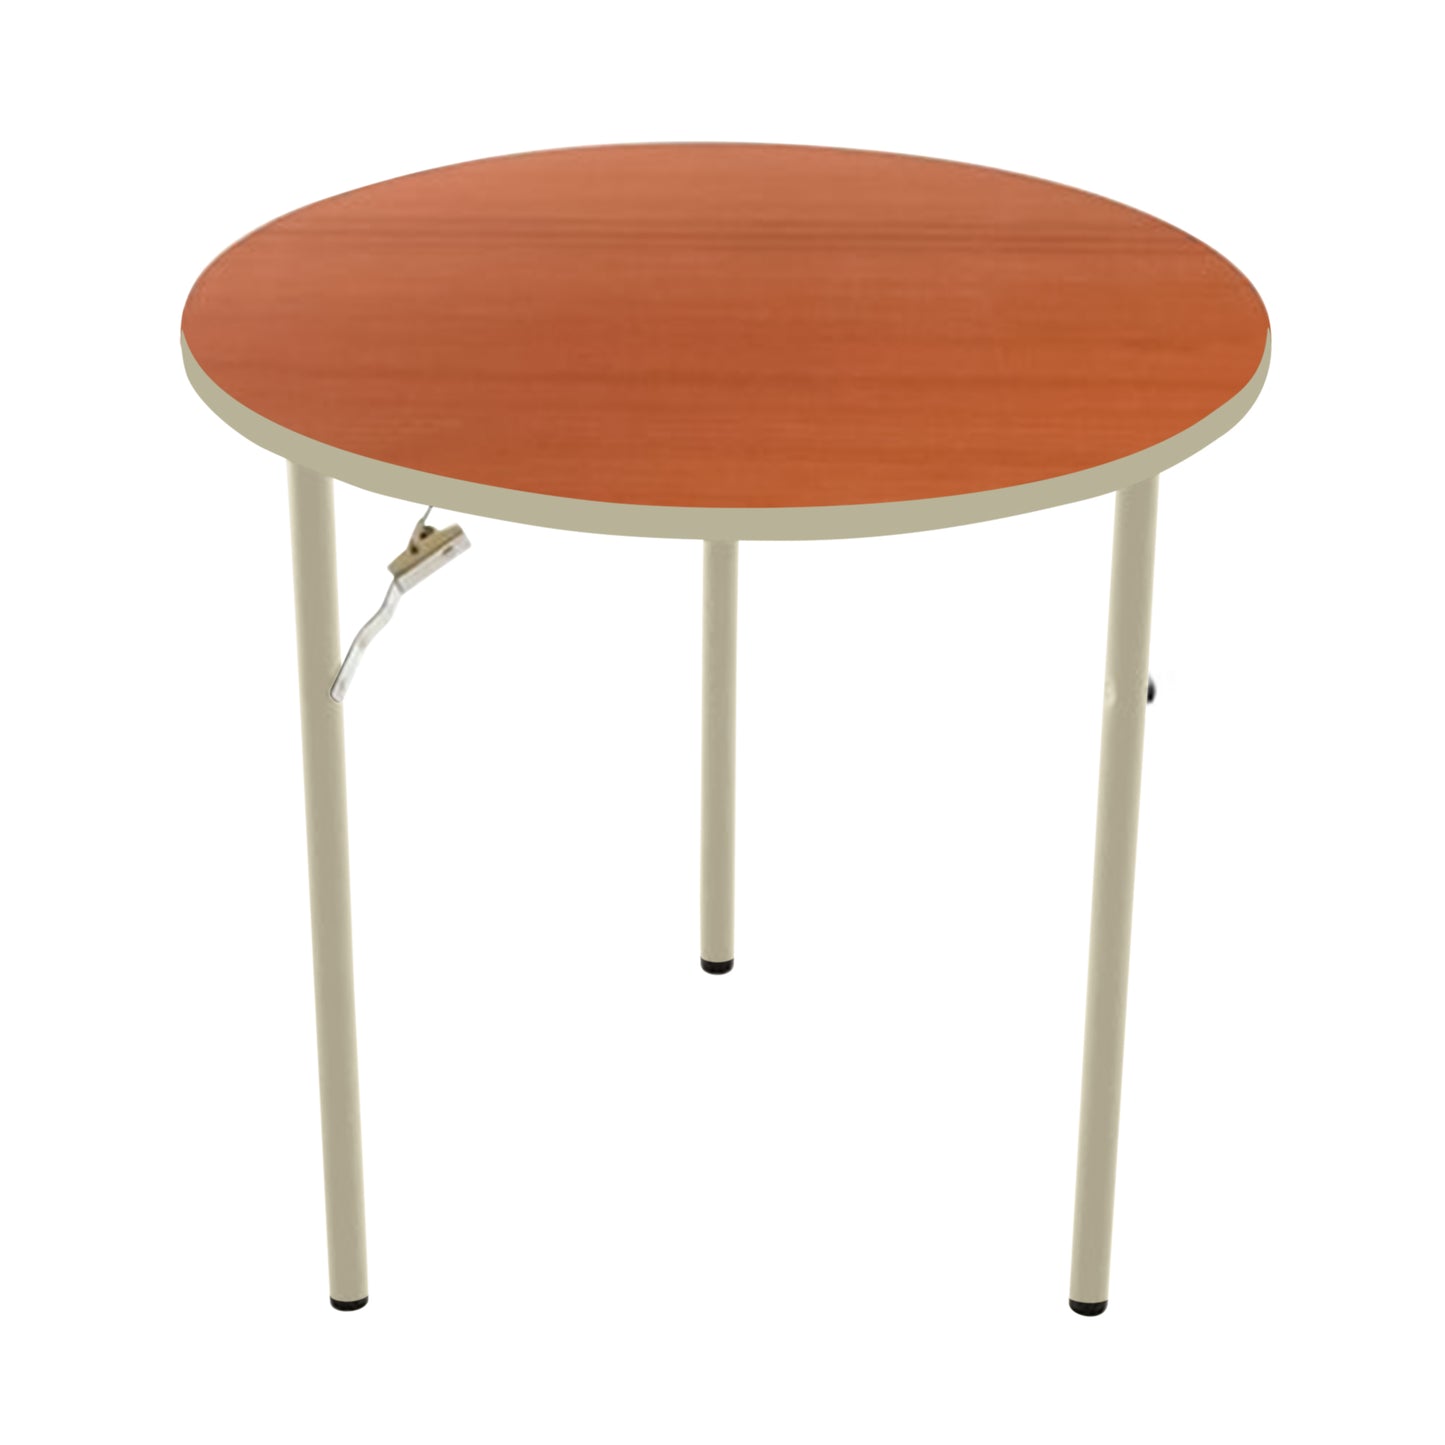 AmTab Folding Table - Plywood Stained and Sealed - Vinyl T-Molding Edge - Round - 54" Diameter x 29"H  (AmTab AMT-R54PM)